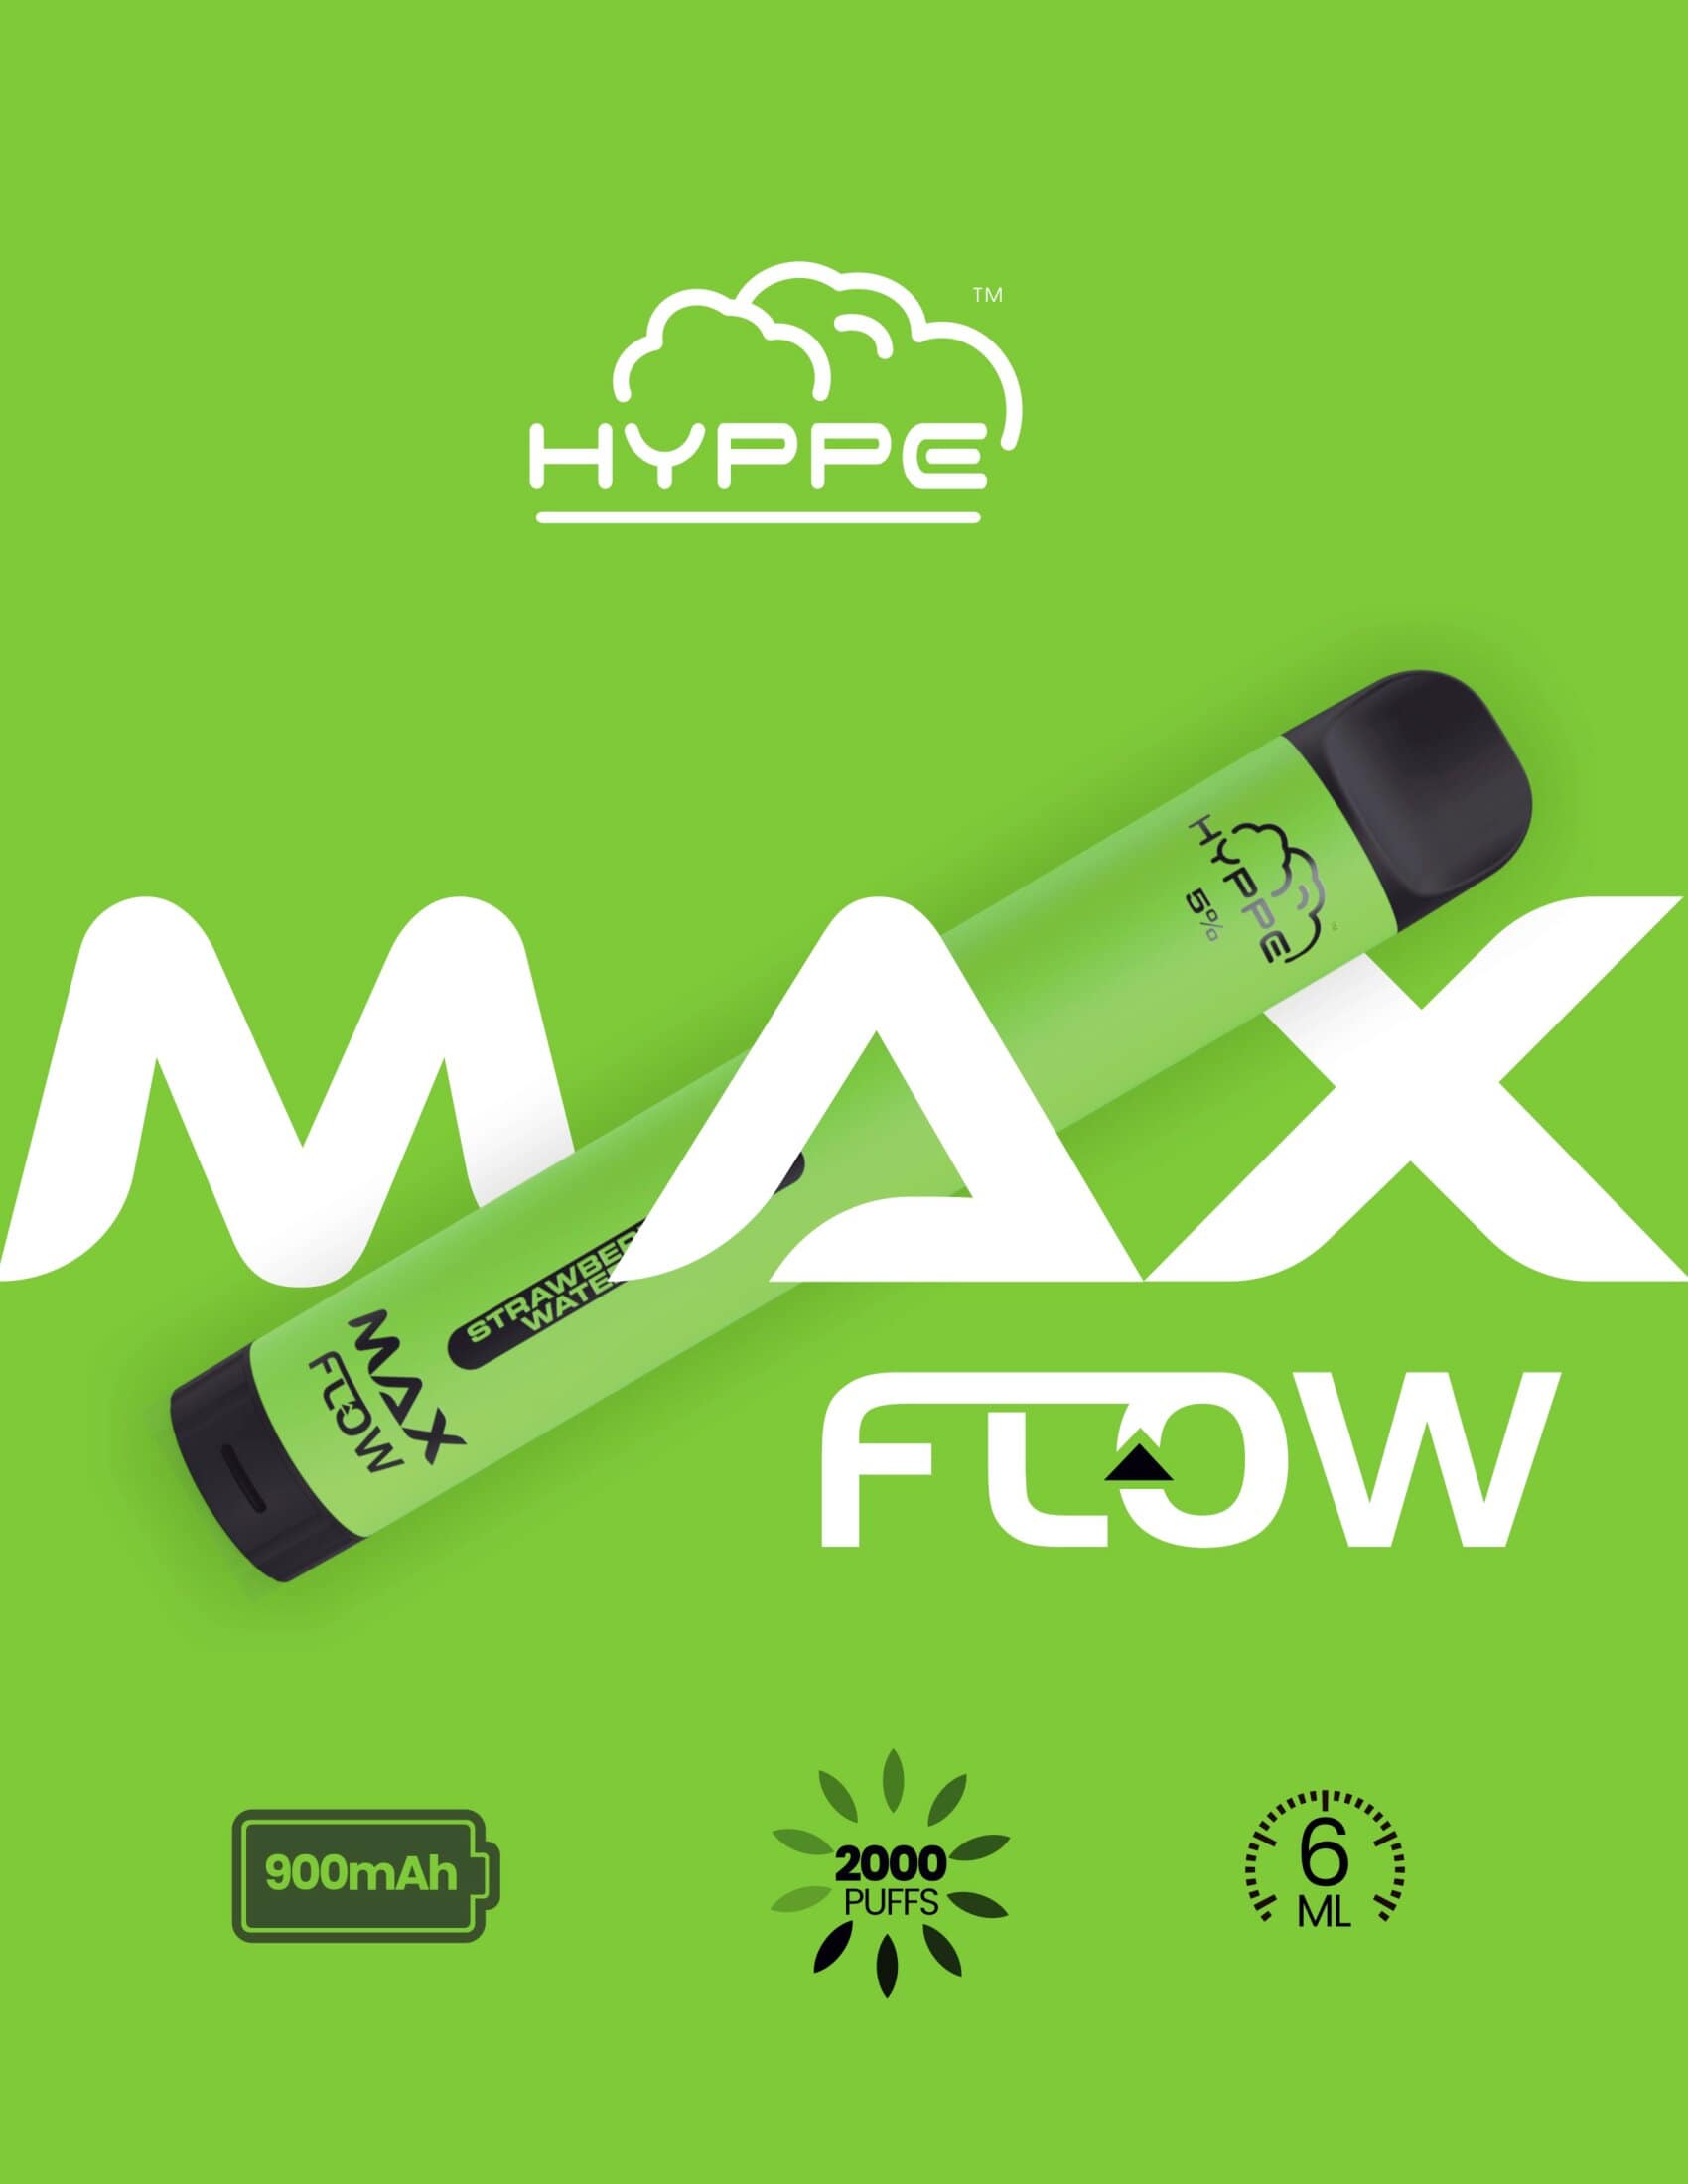 hyppe max flow fake